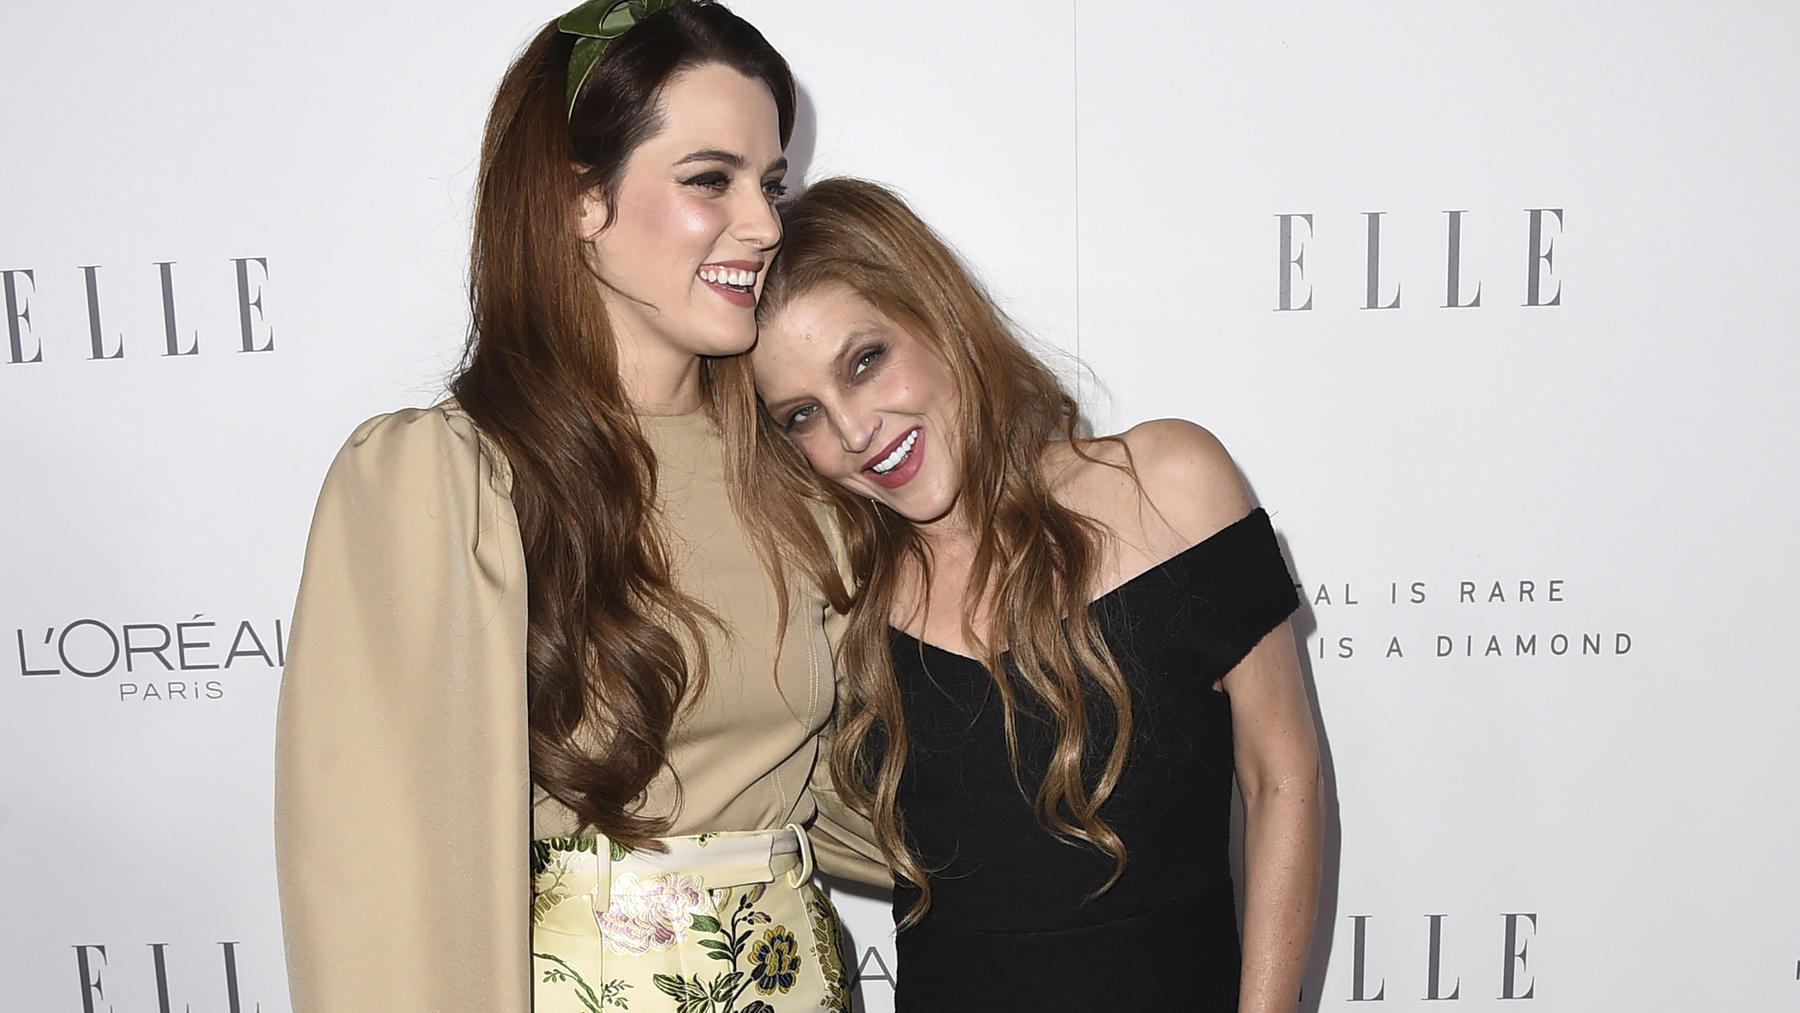 FILE - Riley Keough, left, and her mother Lisa Marie Presley arrive at the 24th annual ELLE Women in Hollywood Awards on Oct. 16, 2017, in Los Angeles. Presley, singer and only child of Elvis, died Thursday, Jan. 12, 2023, after a hospitalization, ac